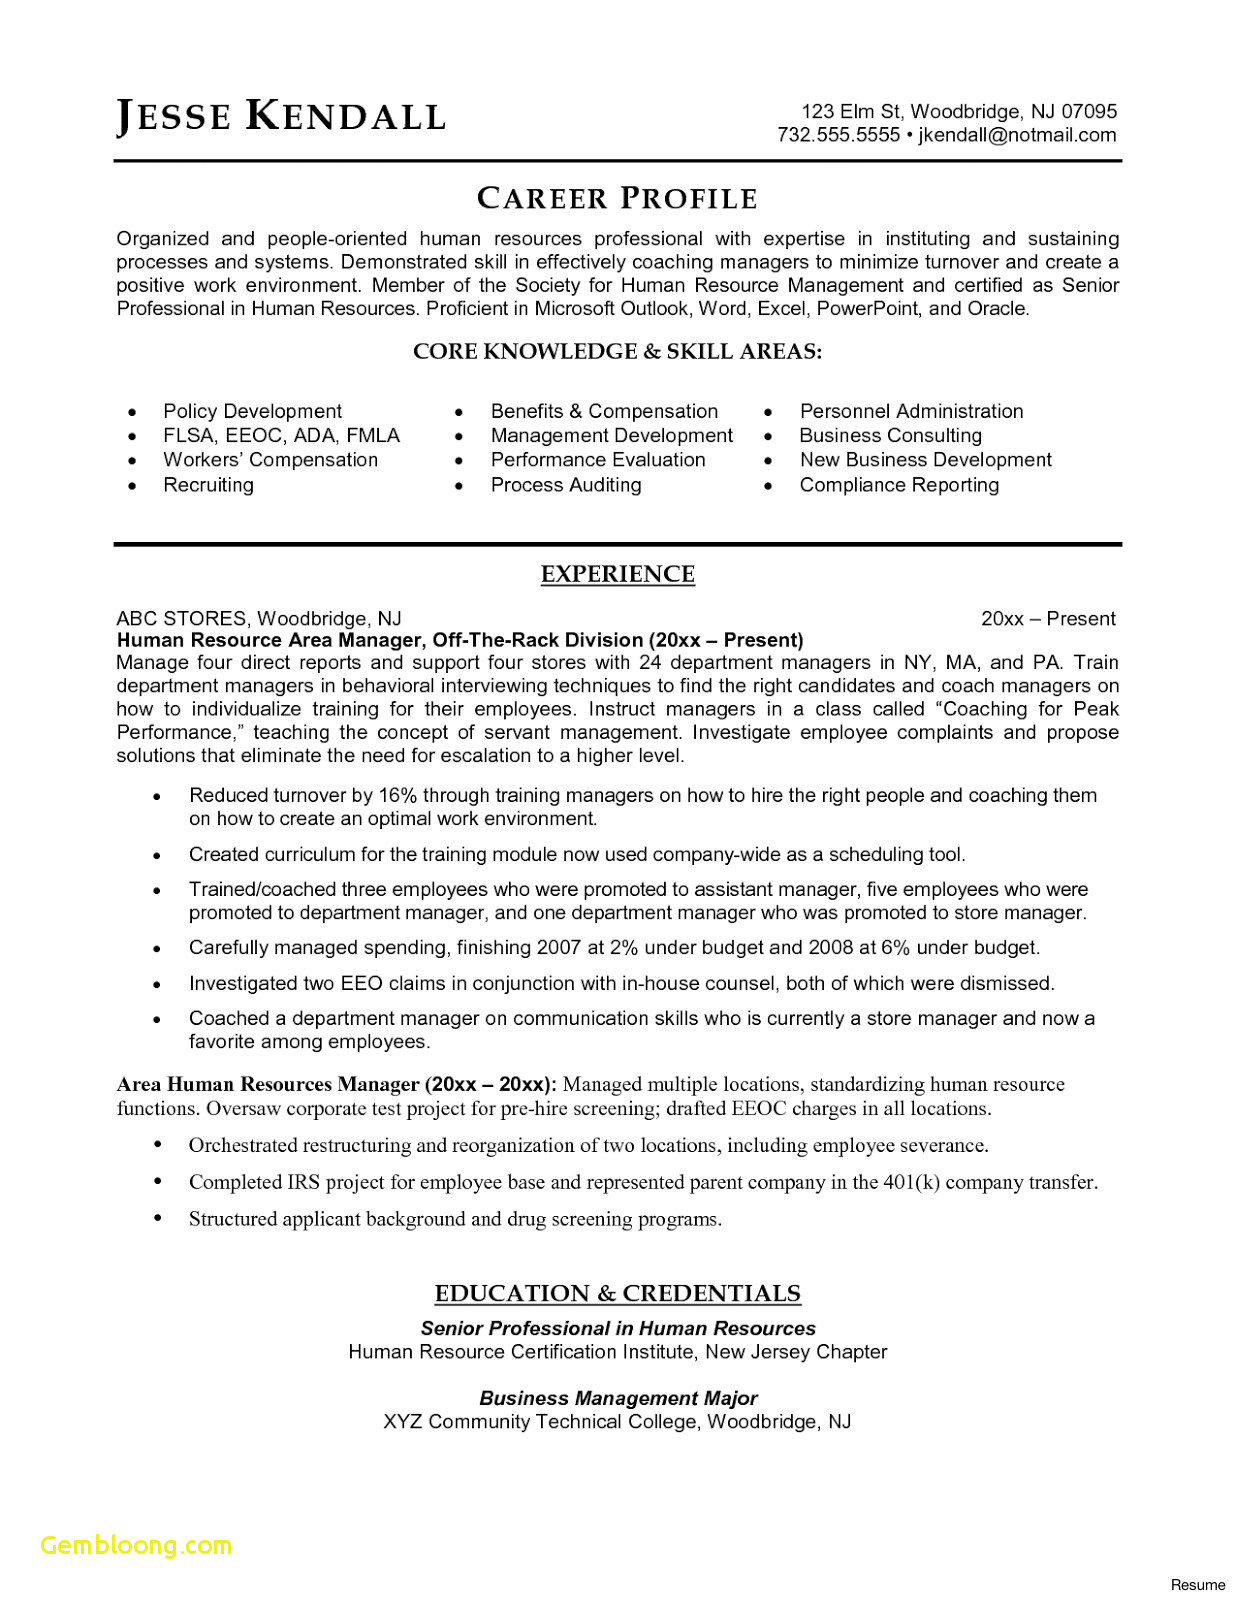 Letter Of Employment Template Word - 25 Template for Resume Word Free Sample Resume